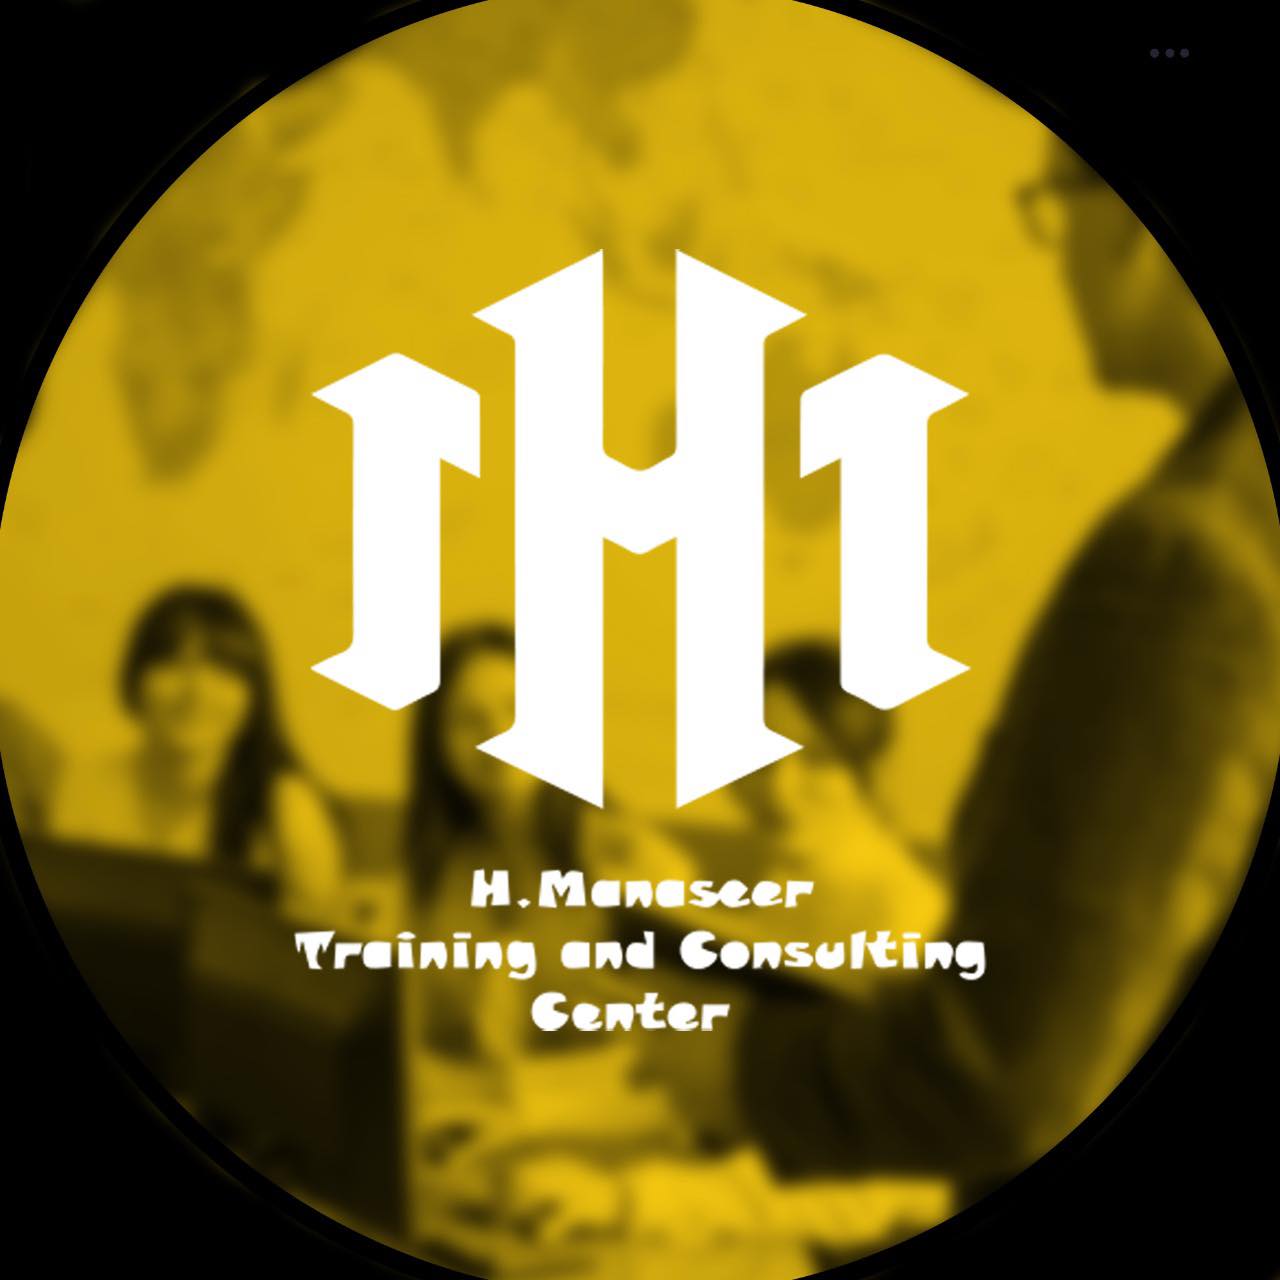 H.Manaseer Training and Consulting Cente